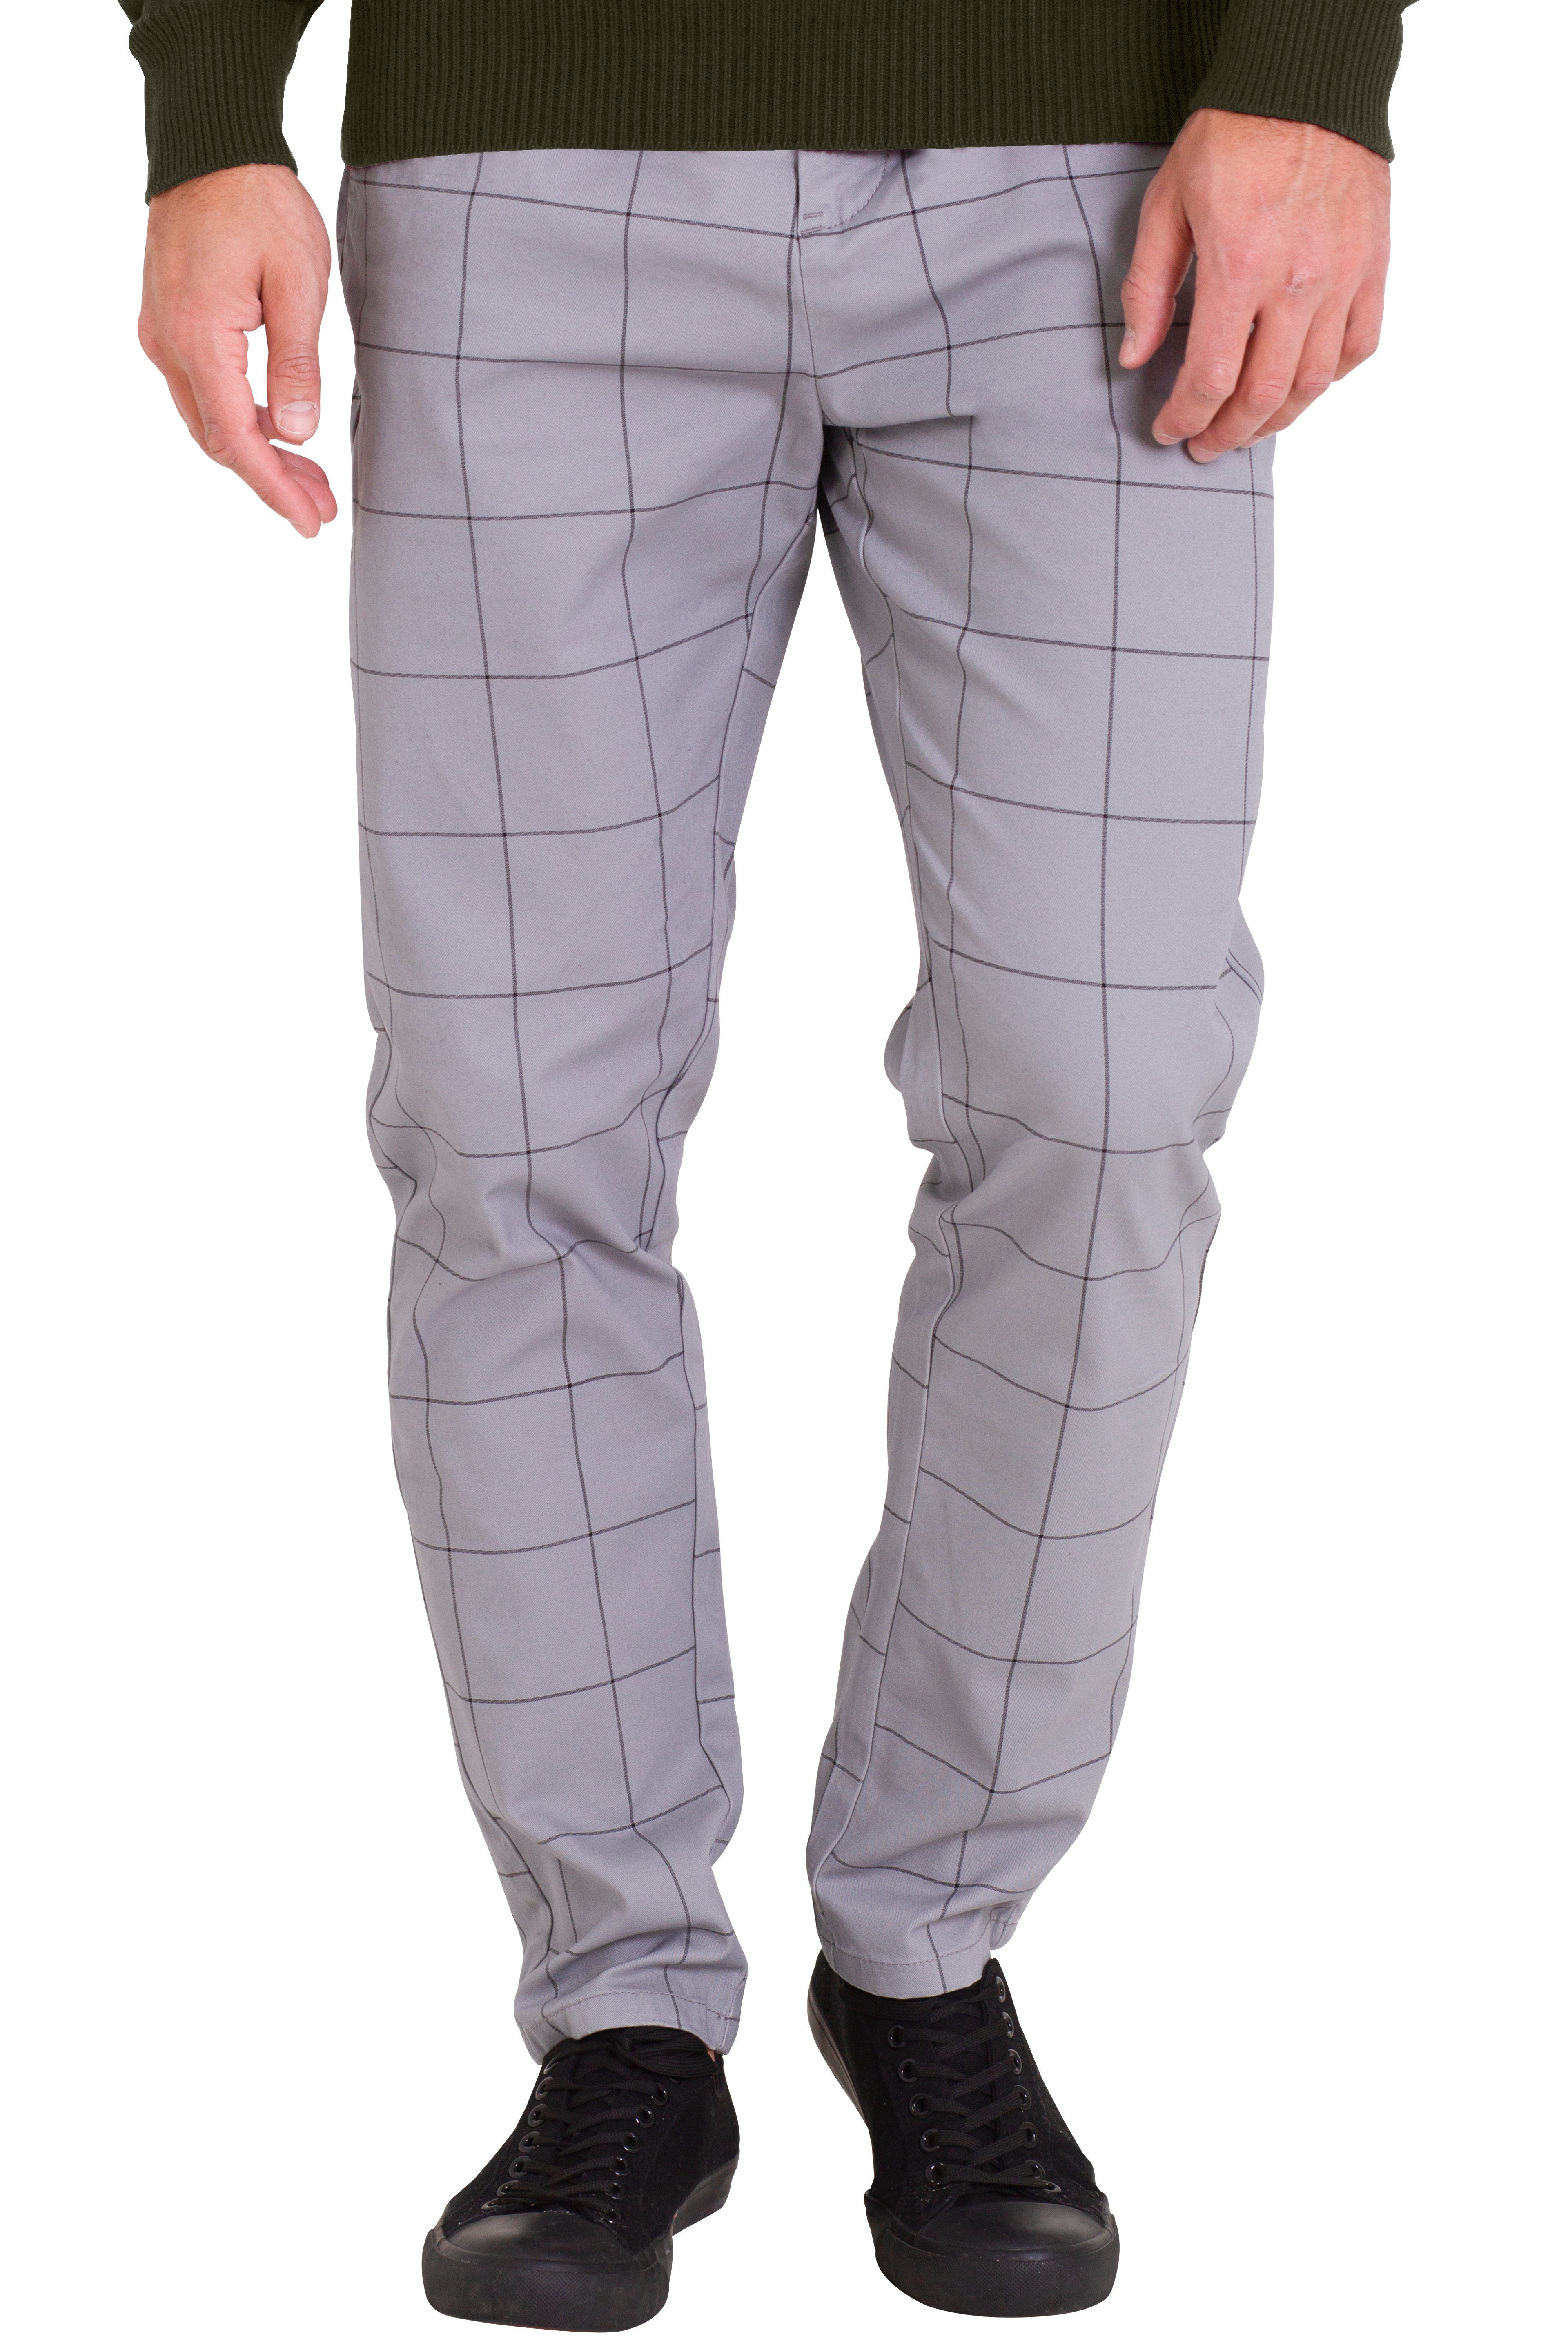 BlauerHafen Chinohose Herren Formaler Front sizes available Business 4 30''-38'' Check Office Hose Slim-Fit Full Pants 2 All Pockets(2 Back), Vintage Hellgrau